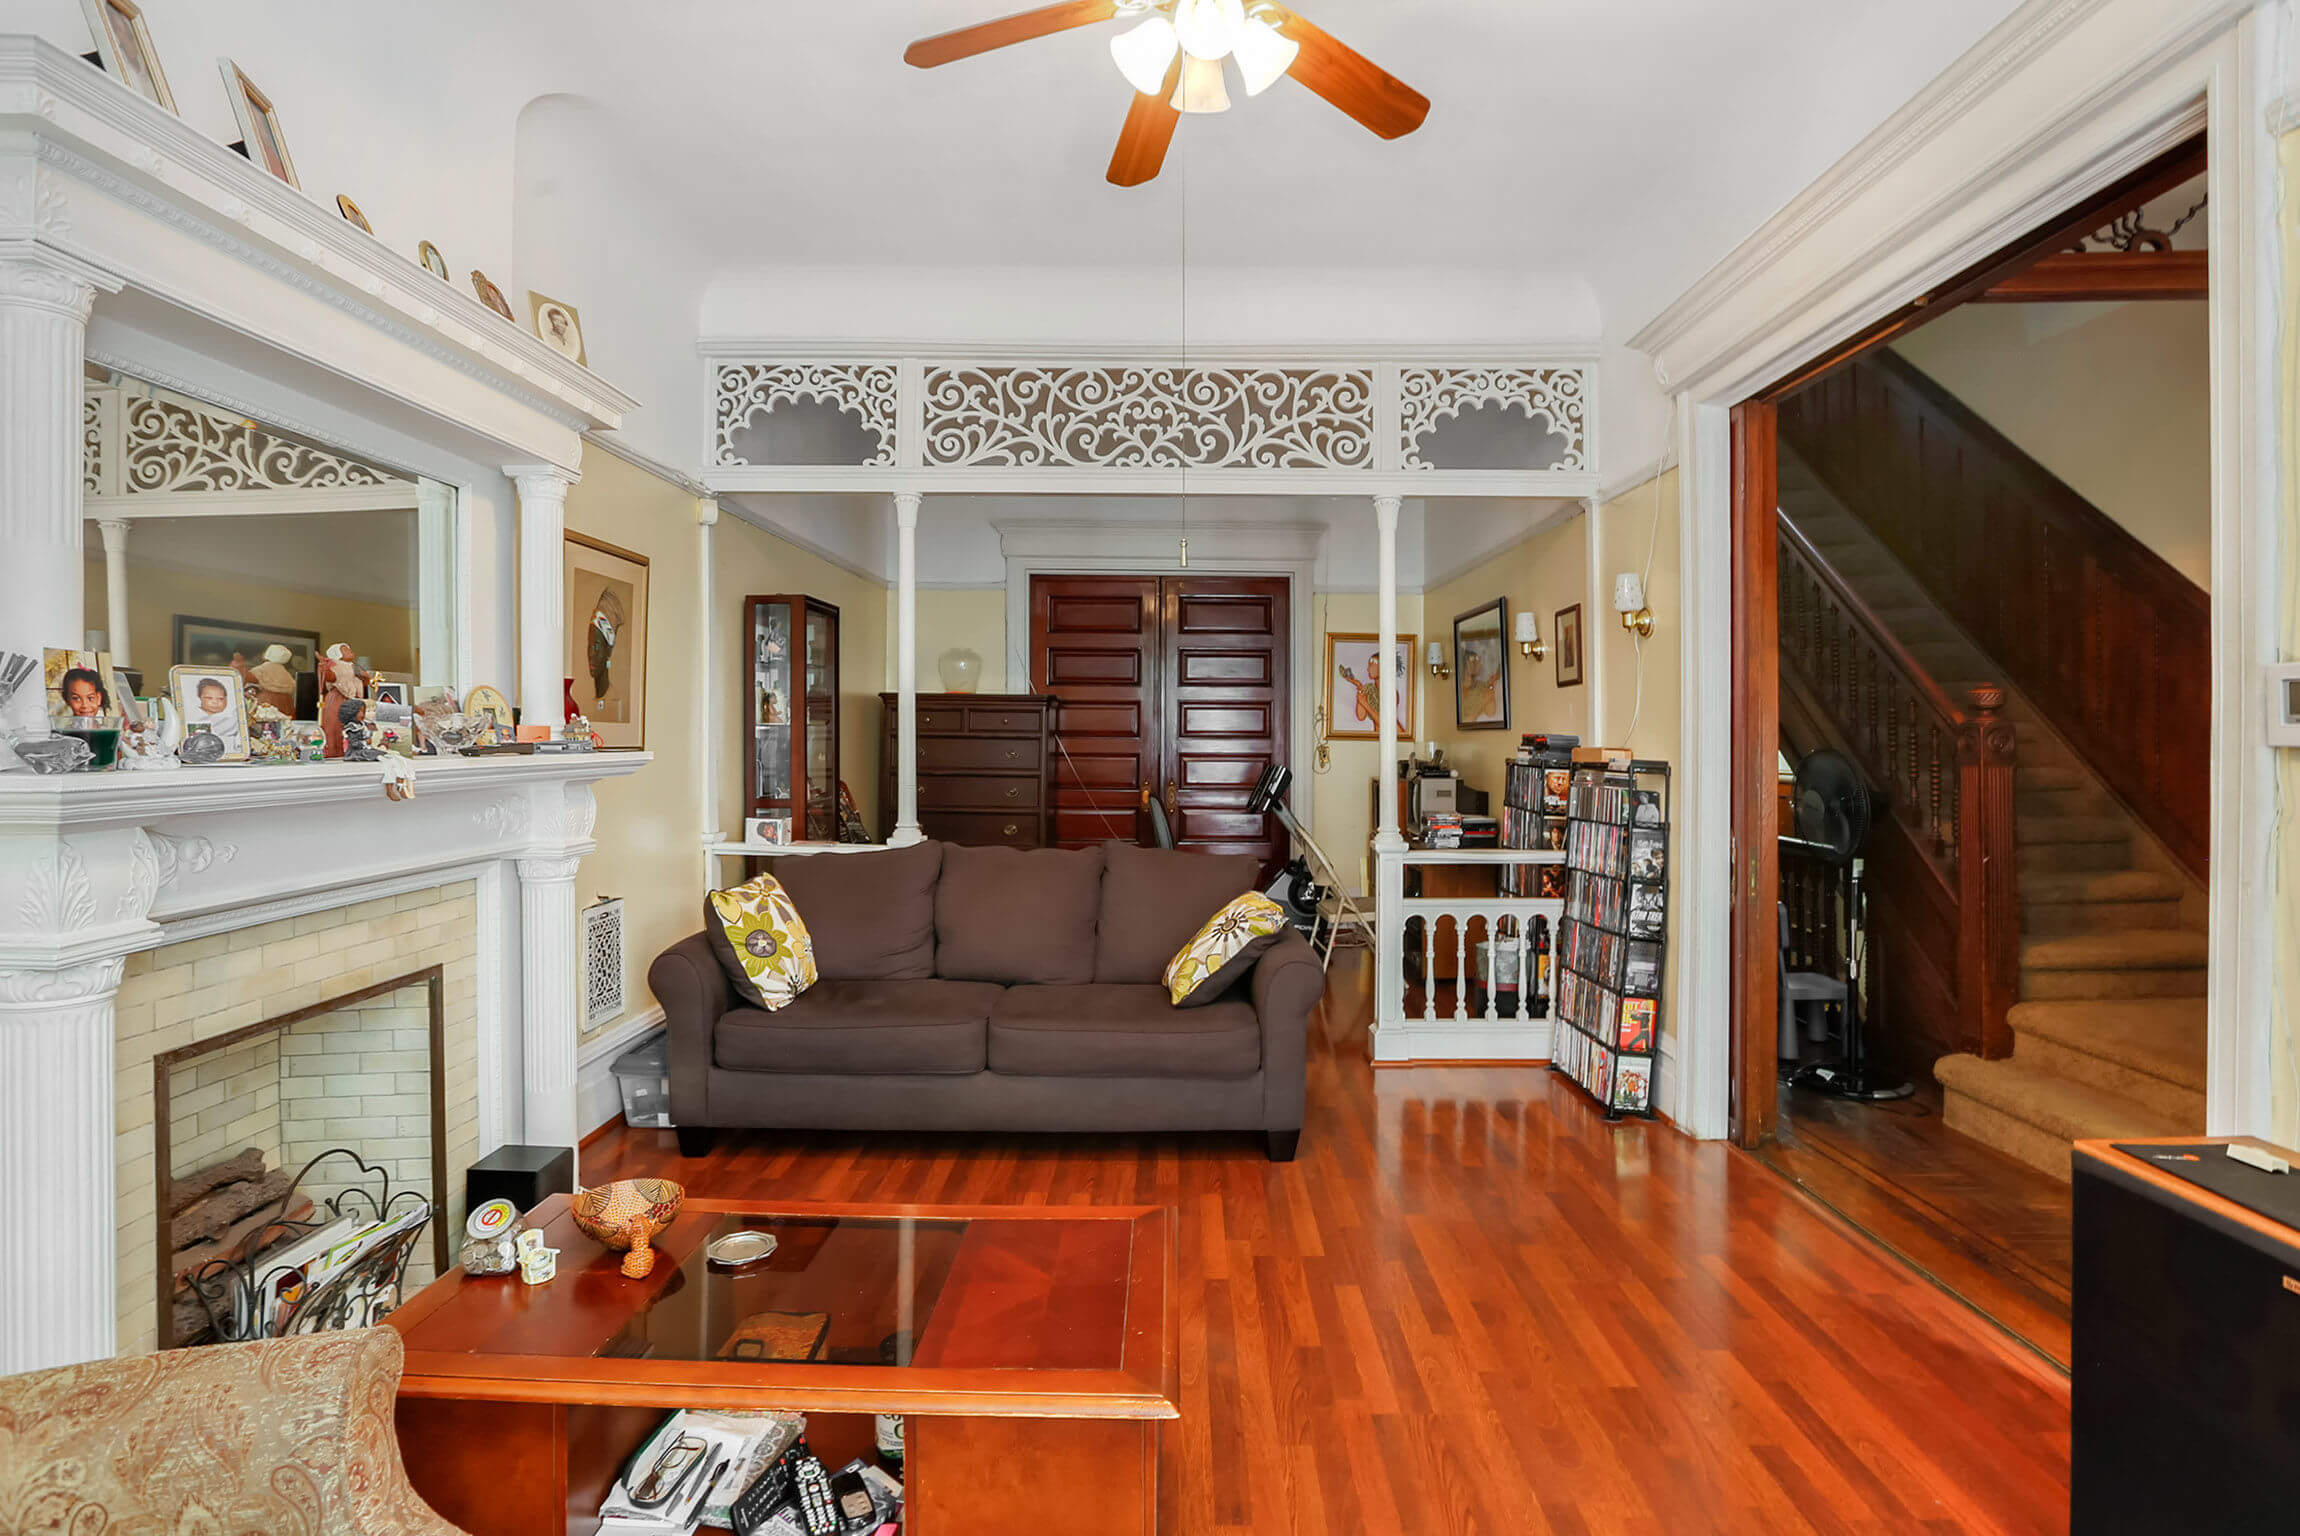 Brooklyn Homes for Sale in Prospect Lefferts Gardens at 67 Rutland Road